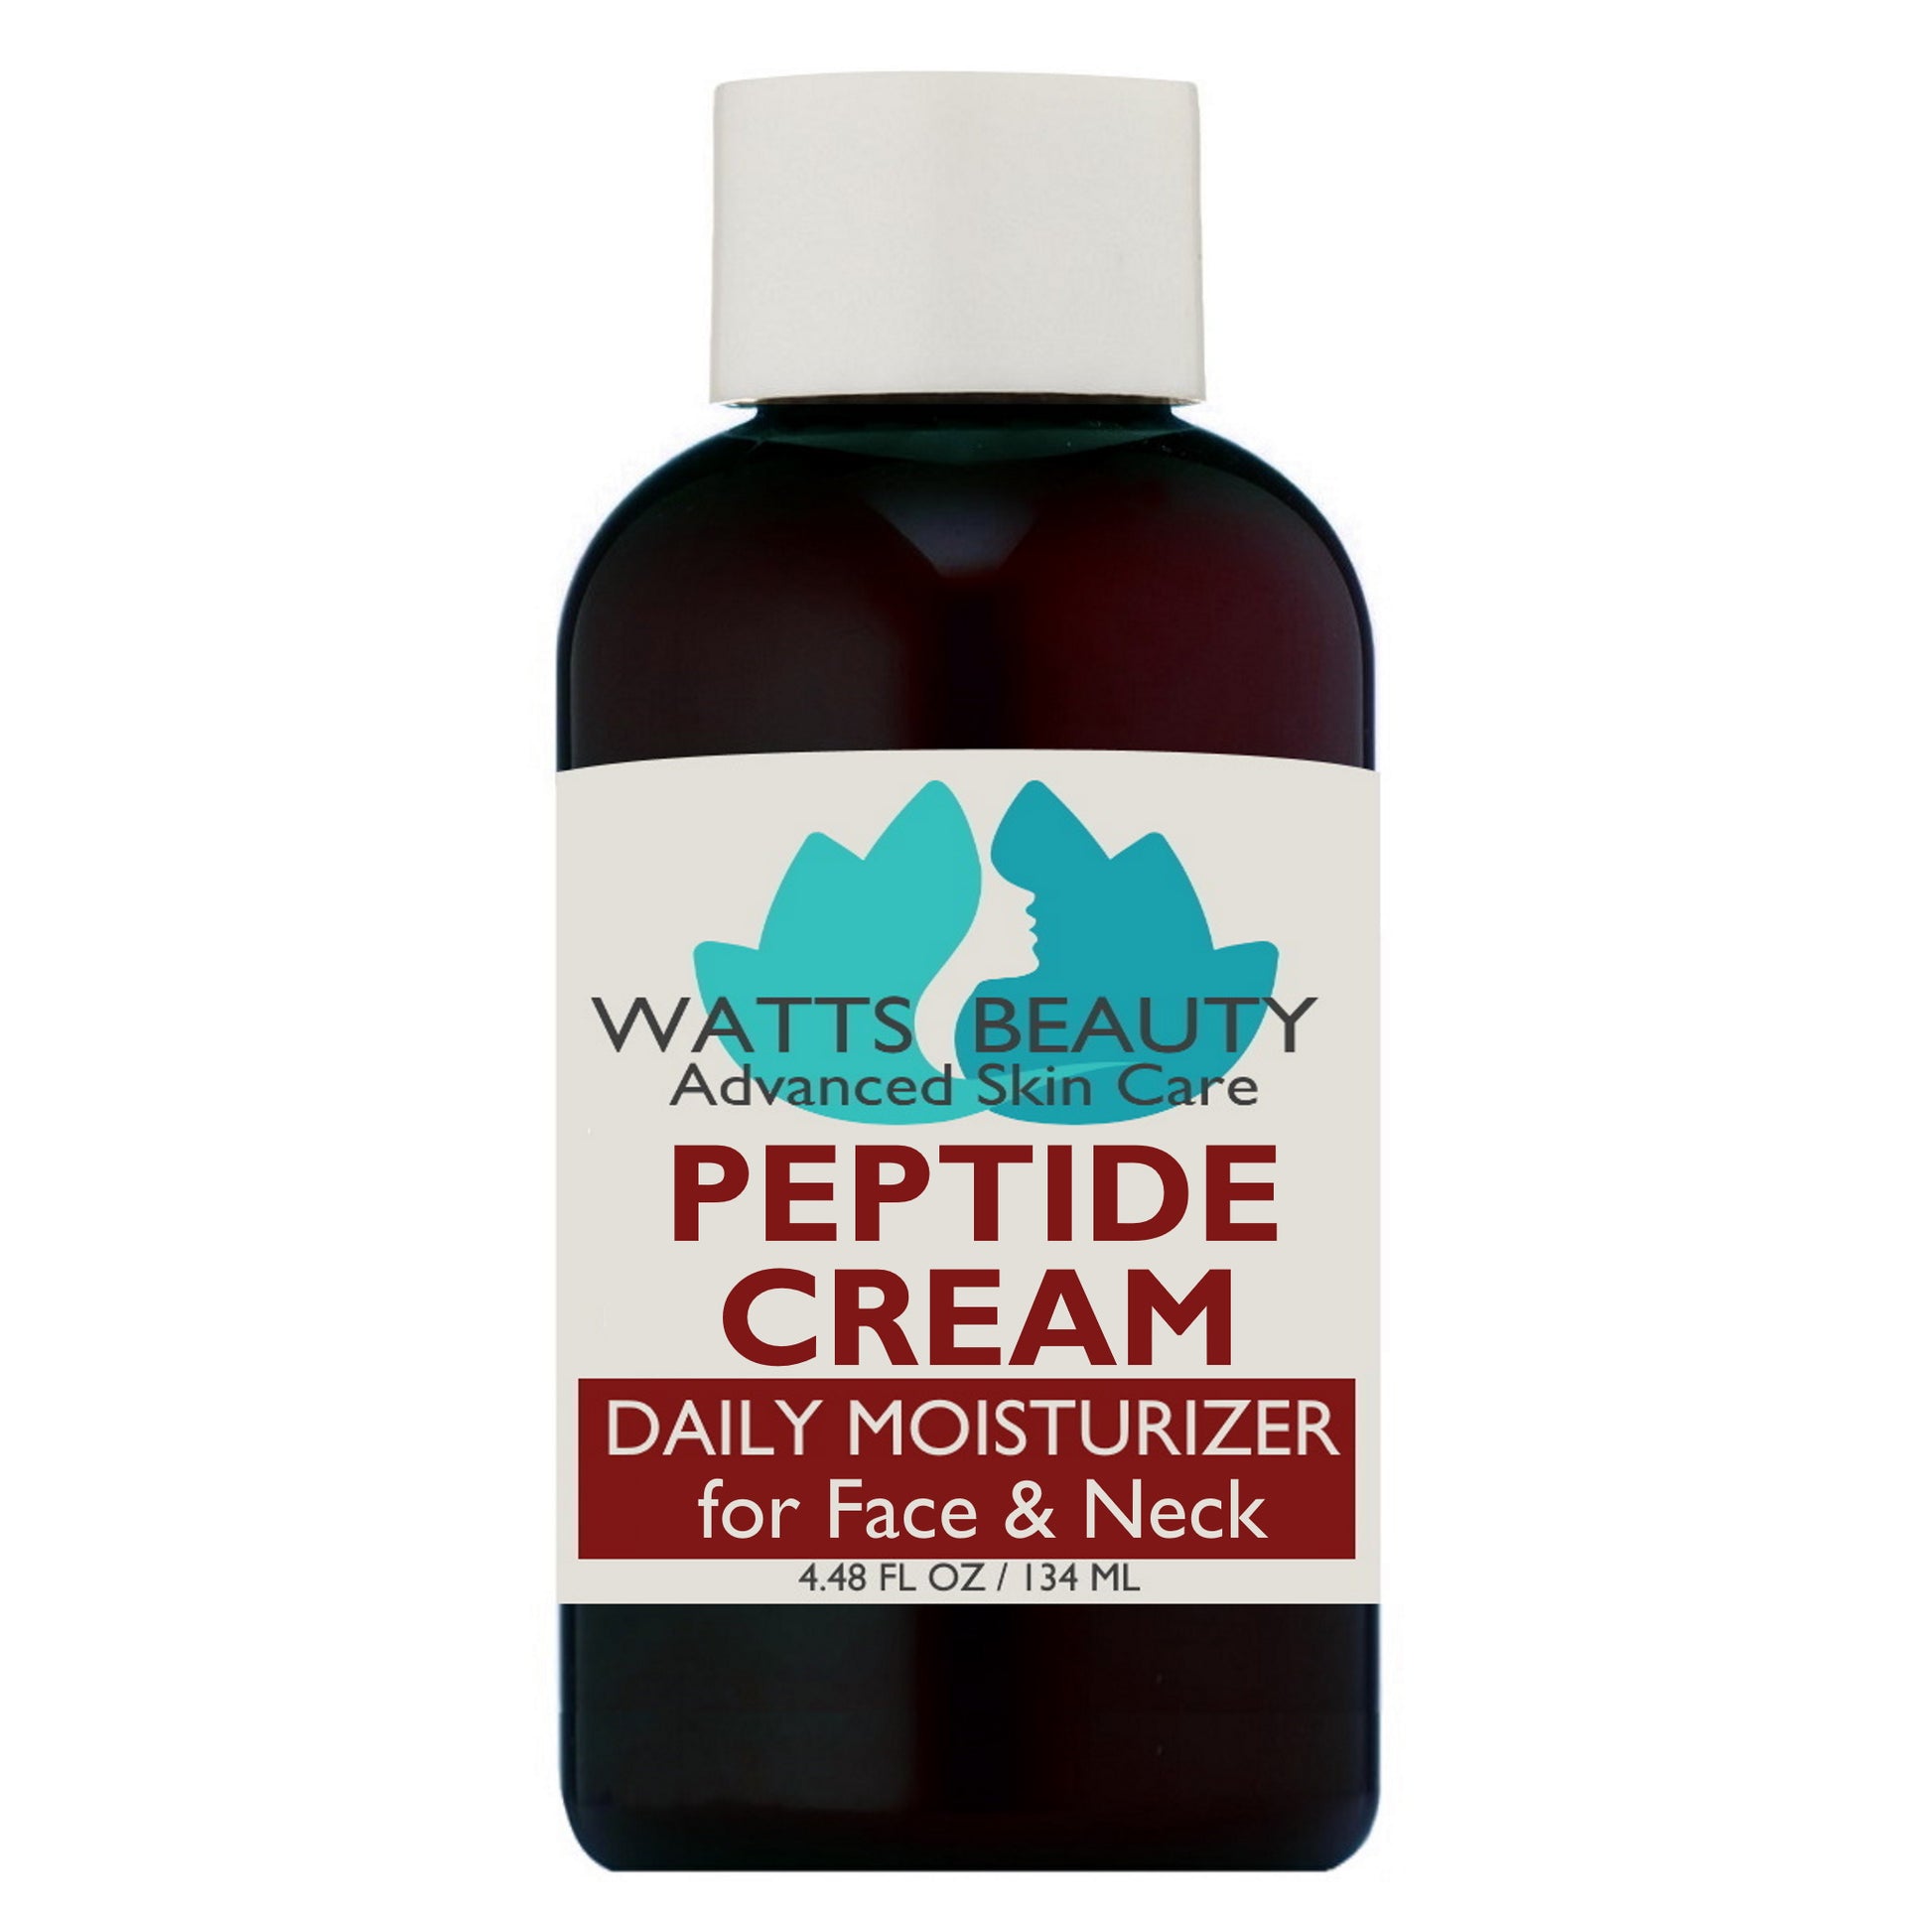 Peptide Cream Daily Moisturizer for face and Neck - Firm, Tone, Lift and Moisturize